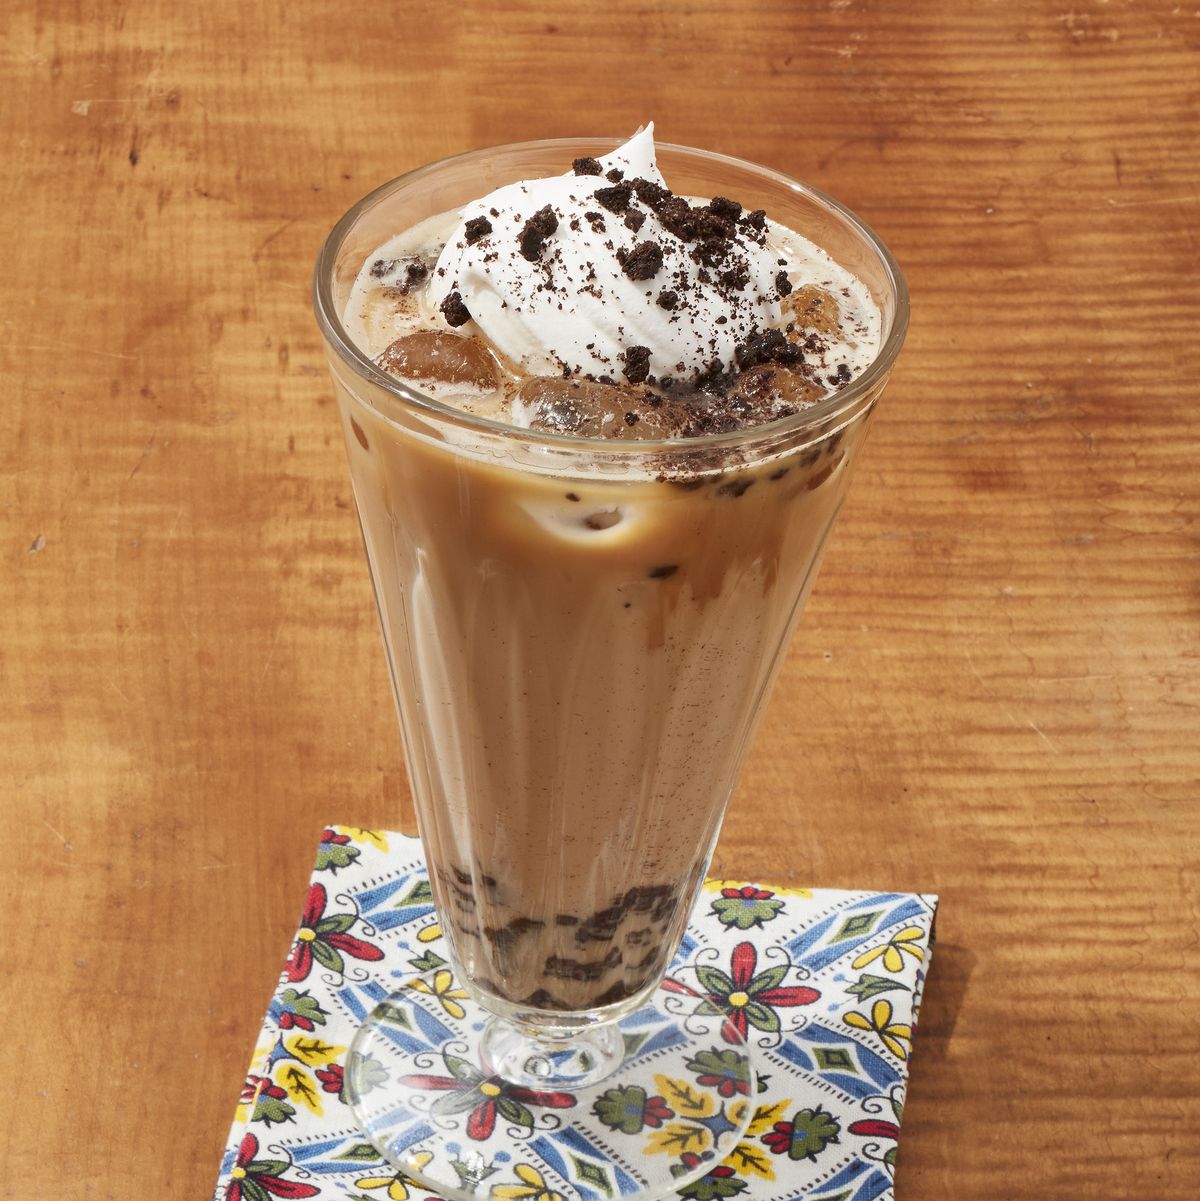 https://hips.hearstapps.com/hmg-prod/images/cookies-and-cream-iced-latte-1616525667.jpg?crop=0.926xw:0.874xh;0.0417xw,0.0817xh&resize=1200:*